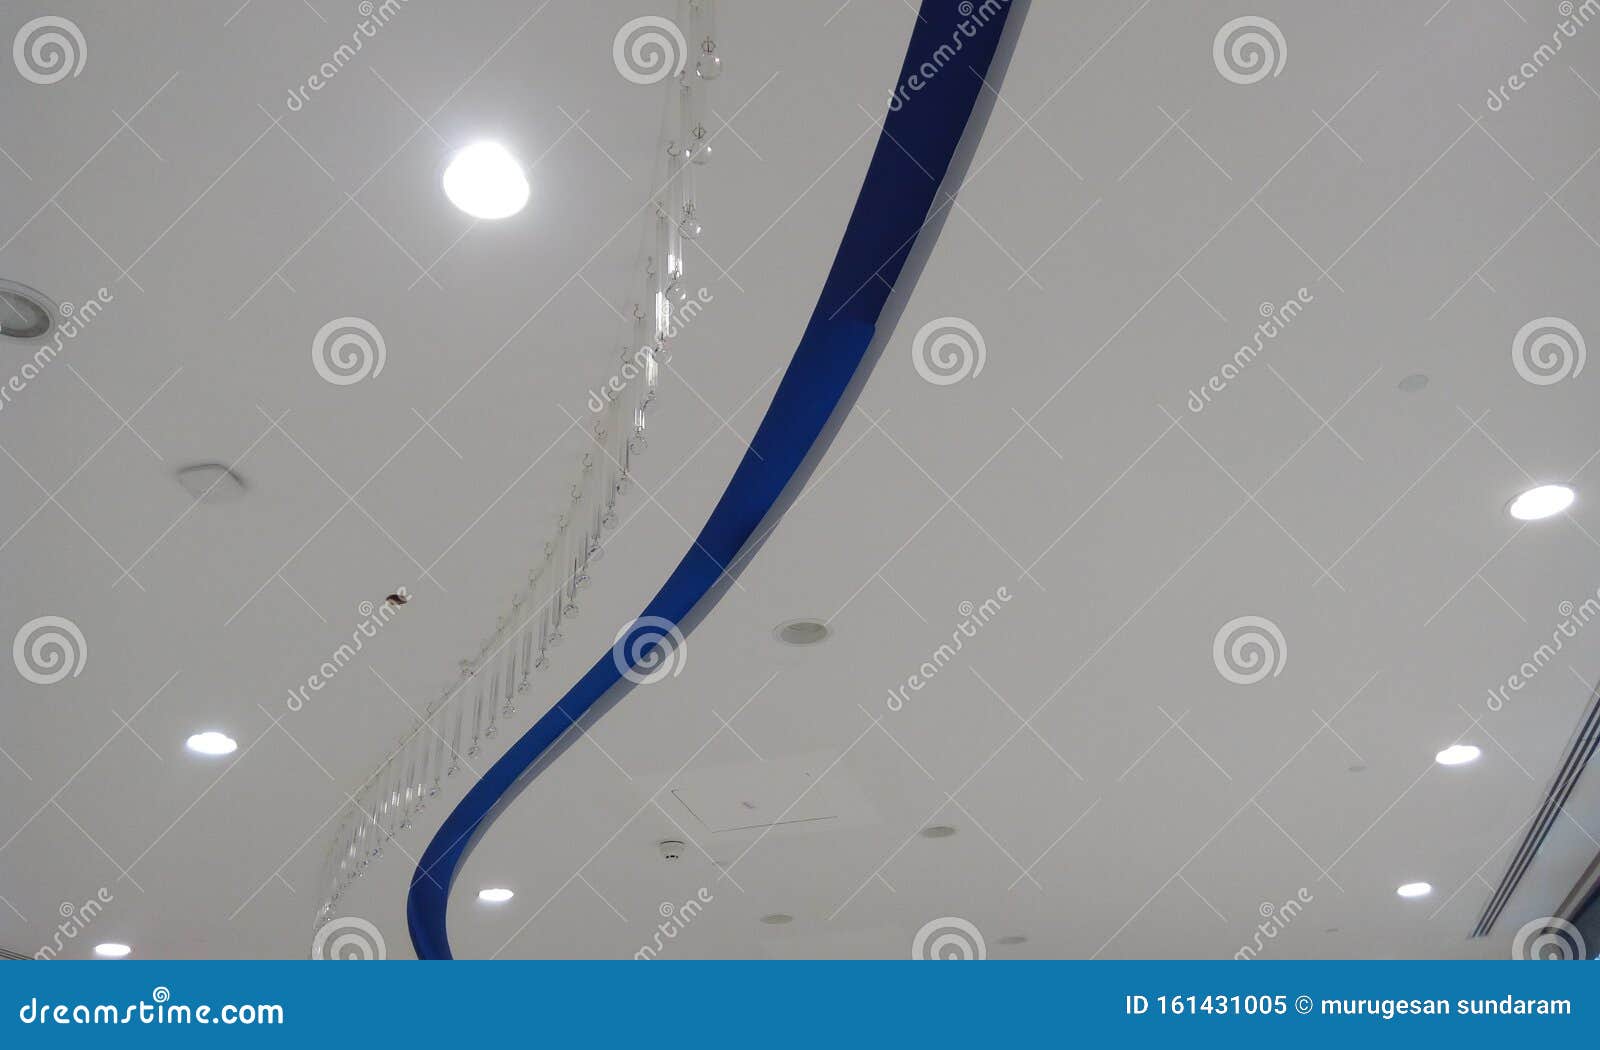 Decor Gypsum False Ceiling And Cove Finishes In A Shopping Mall